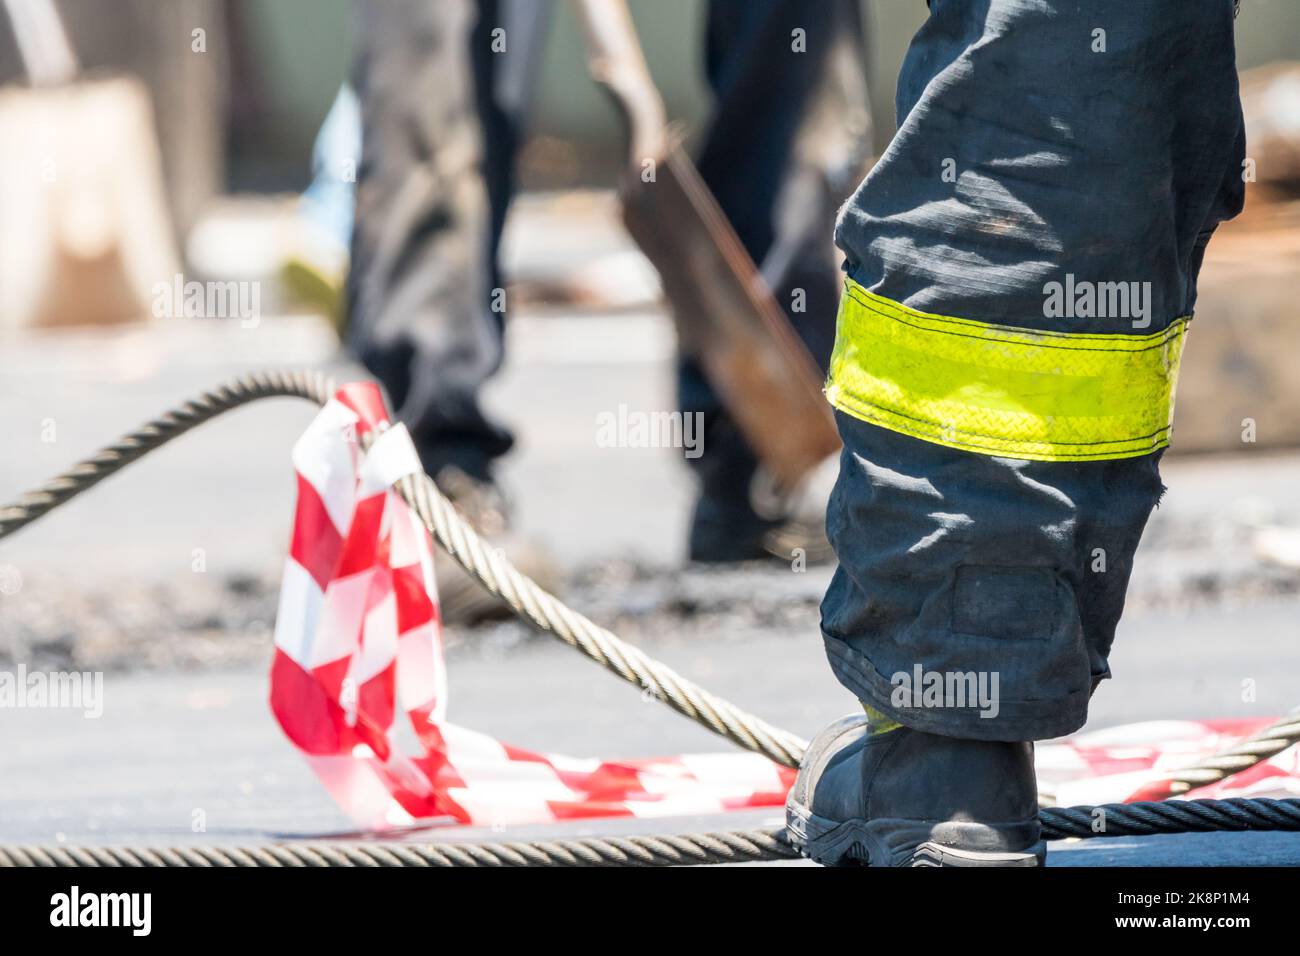 worker or emergency personnel wearing high vis or high visibility uniform or clothing and work boots at a road accident clean up operation Stock Photo